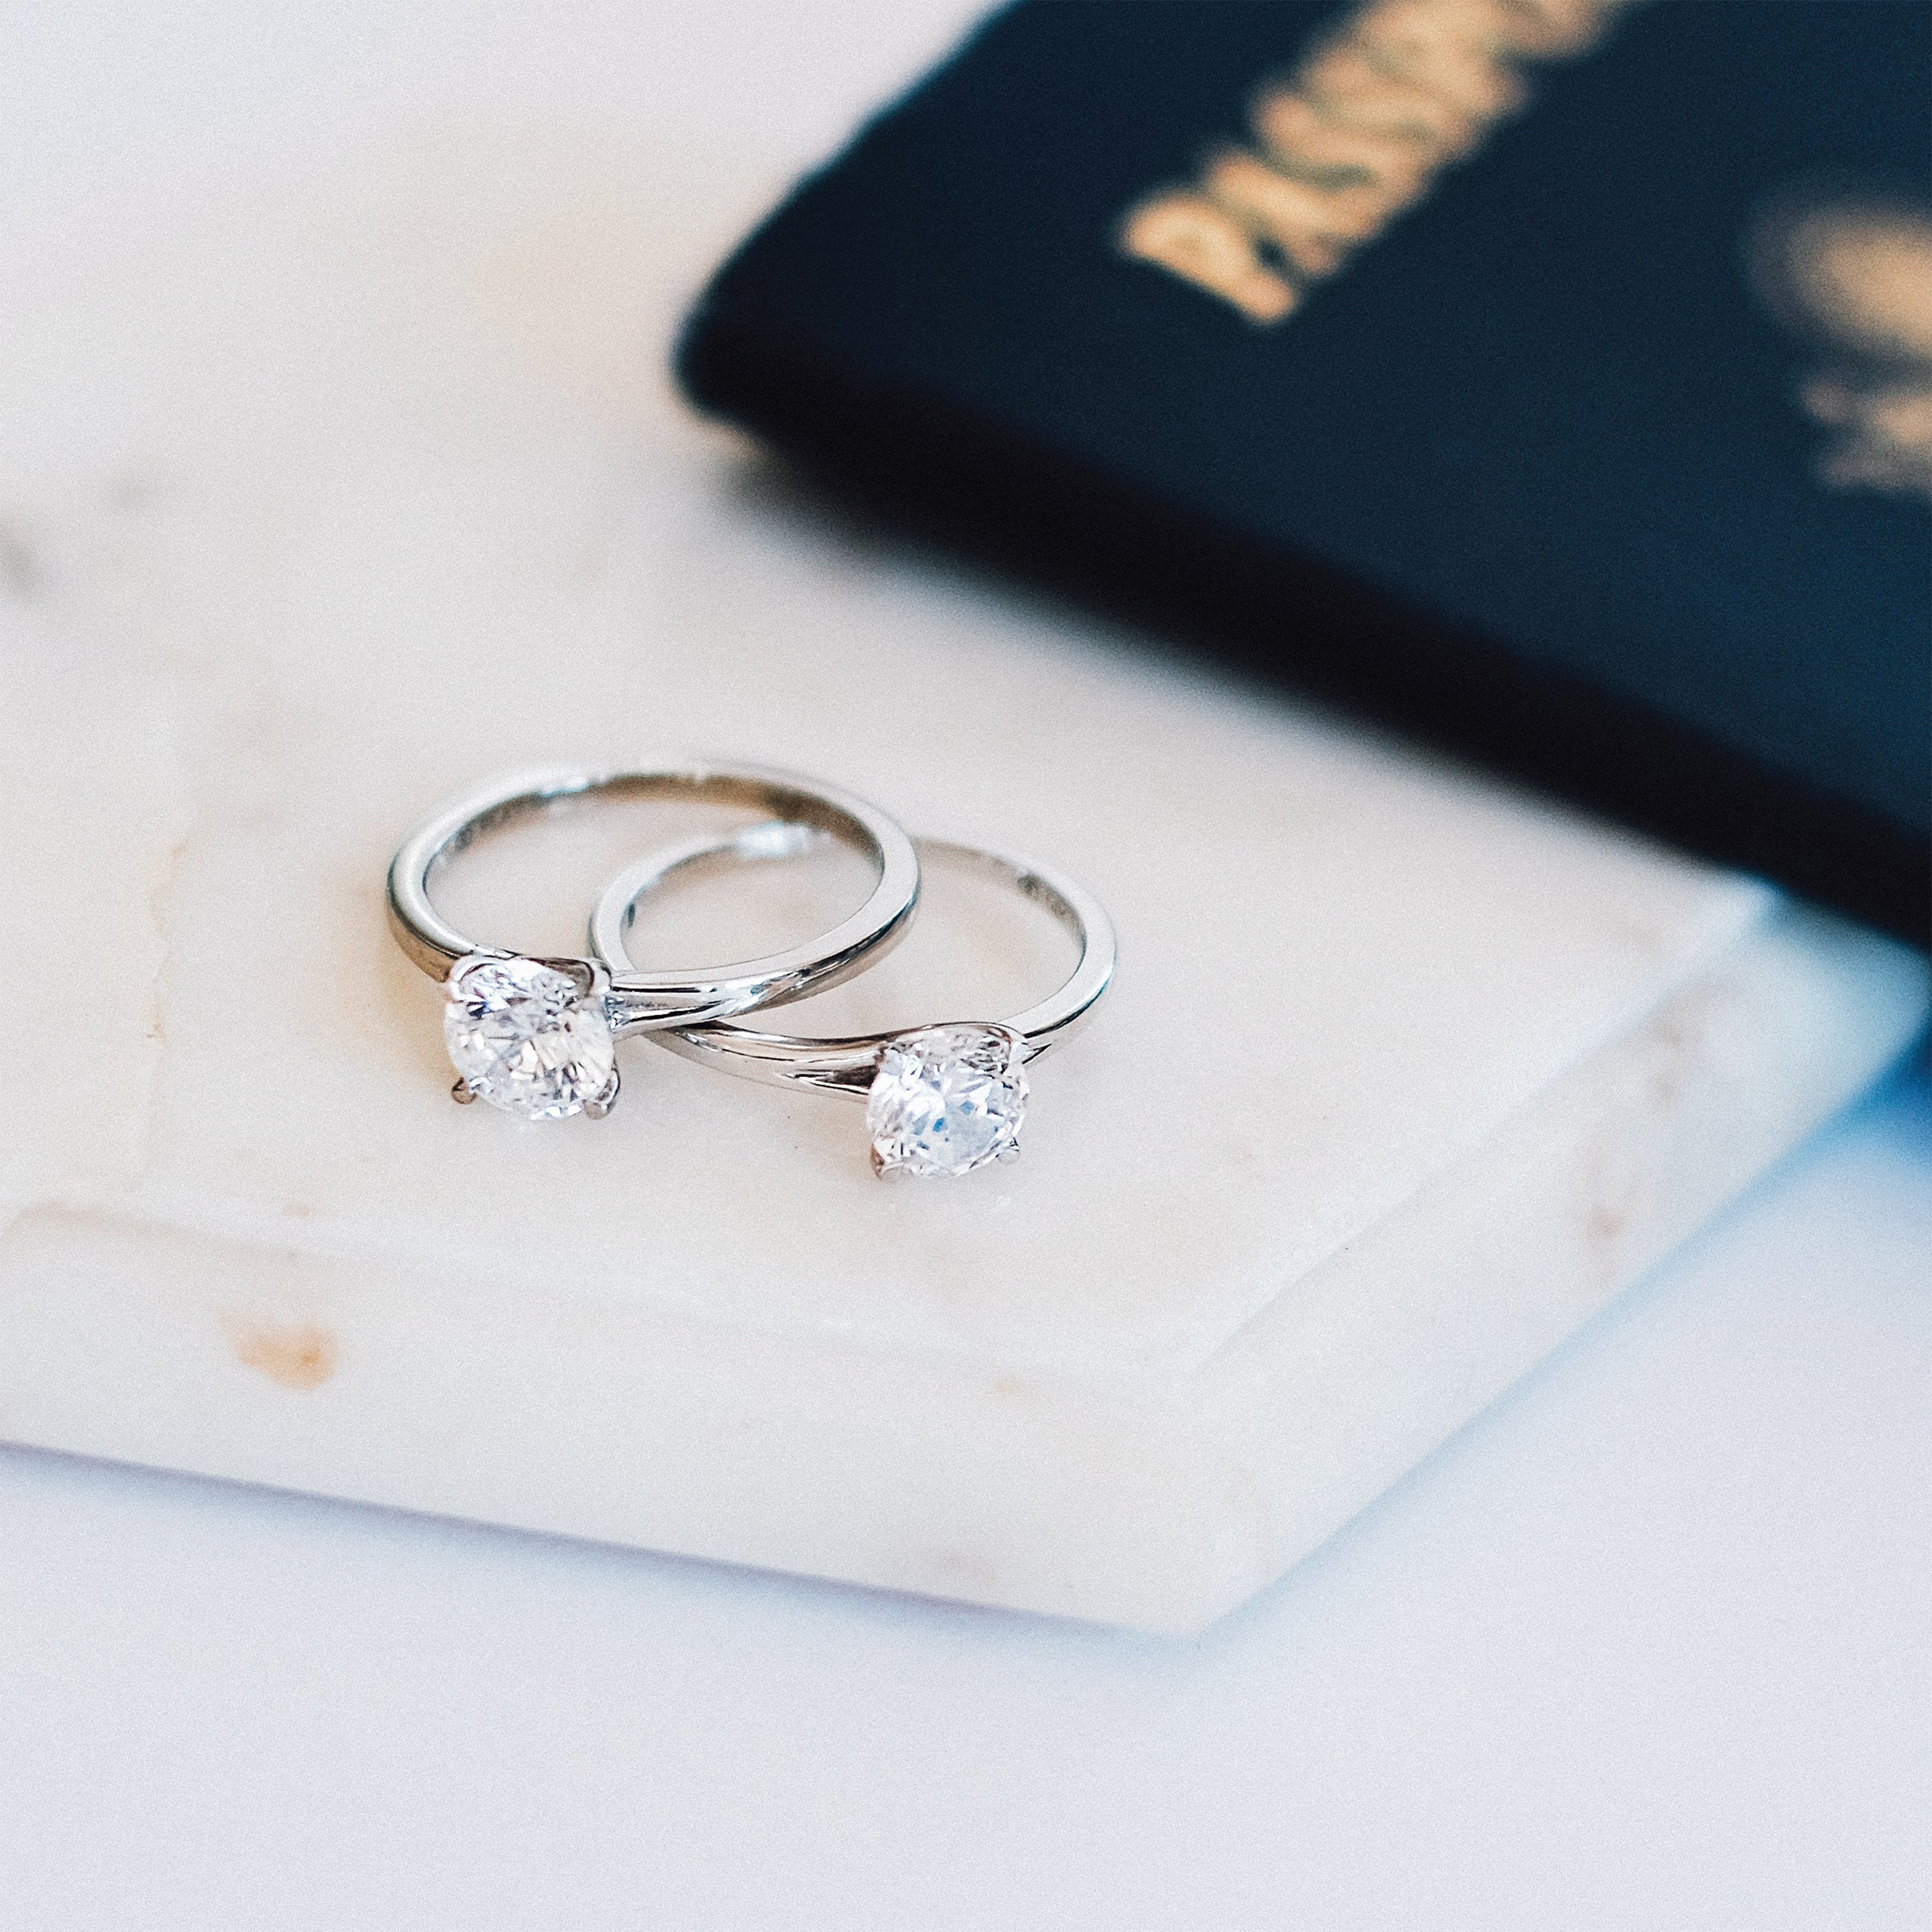 Engagement ring for vacations for $20 and not having to worry